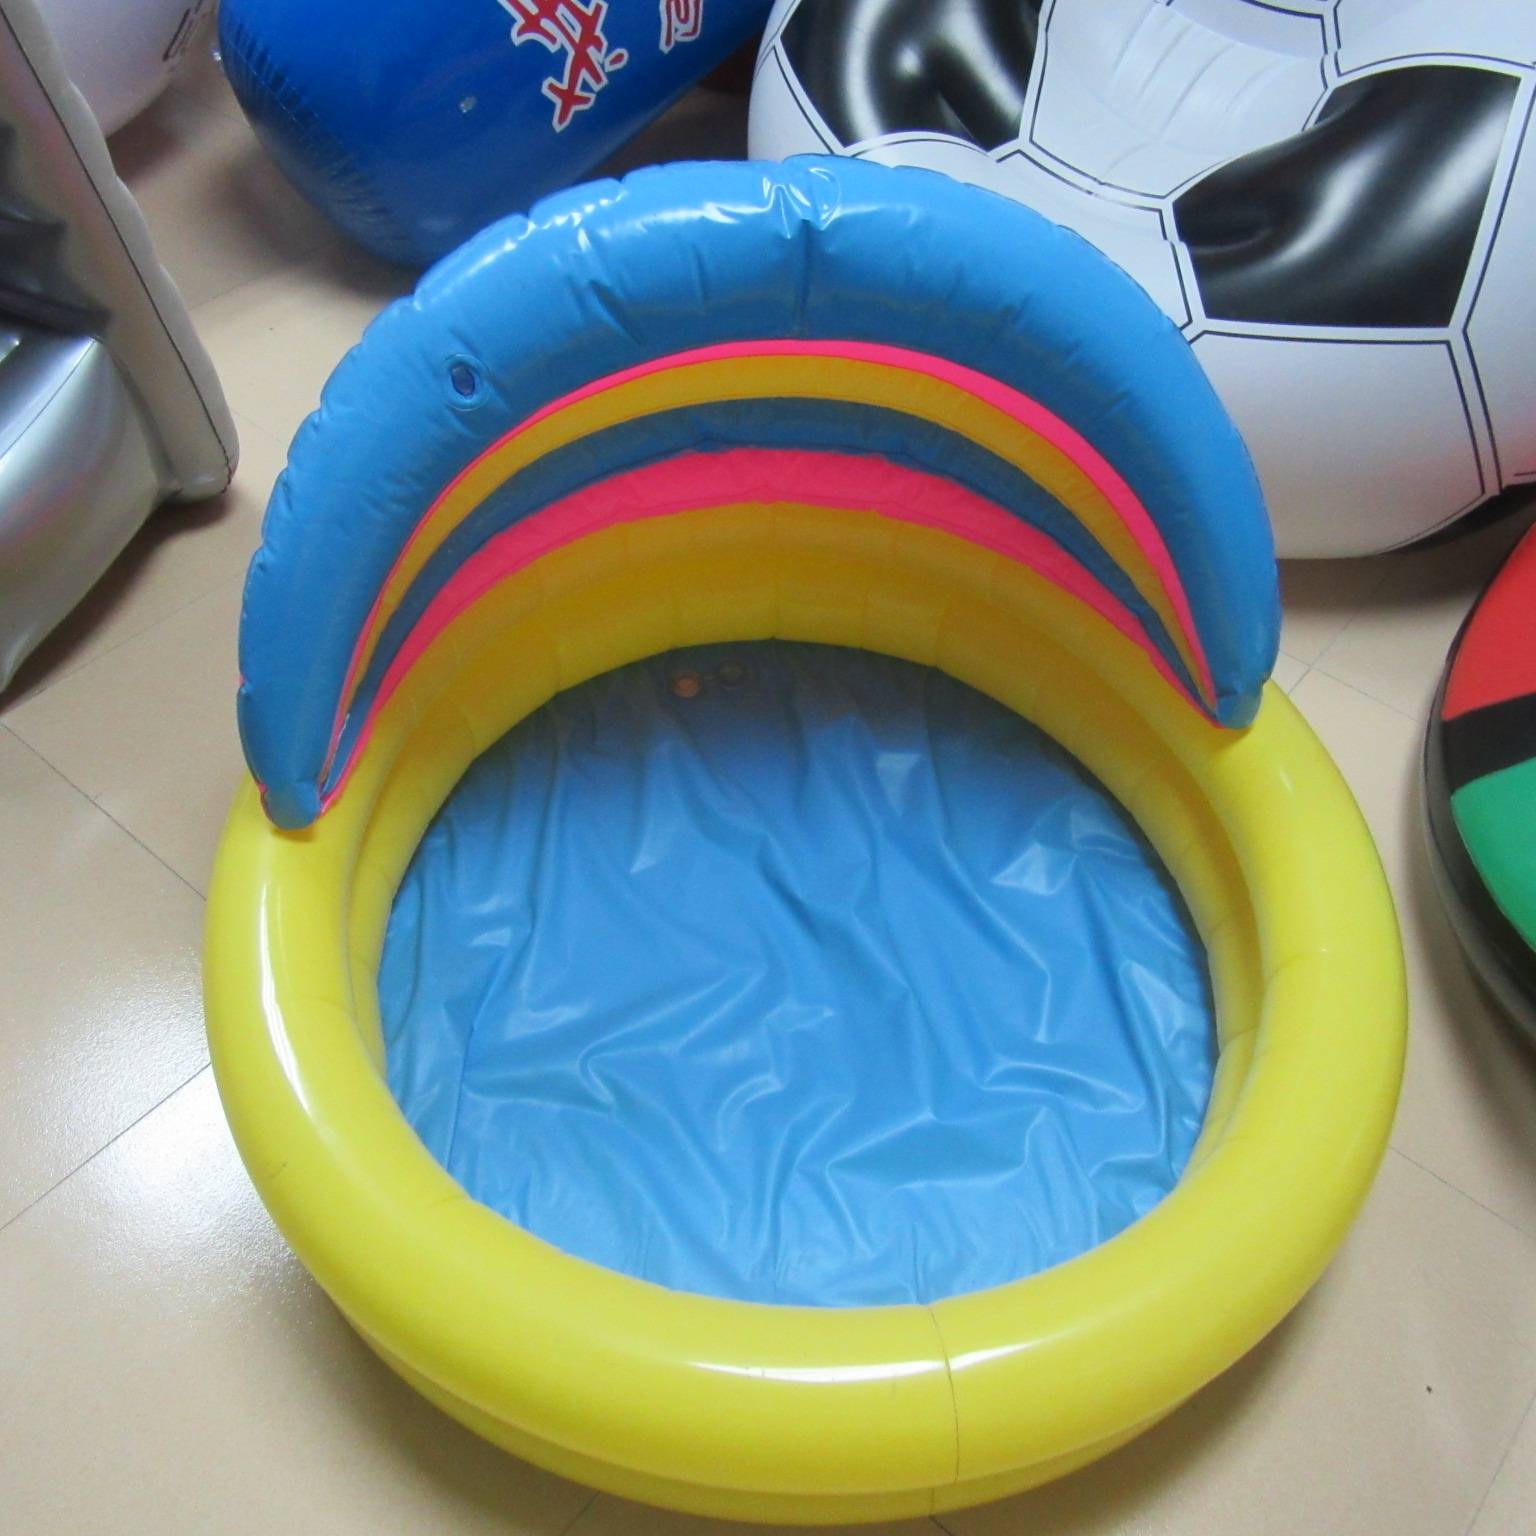 Customised Inflatable Blue Kiddie Swimming Pool With Sun Cover For Kids & Adults Includes Repair Kit